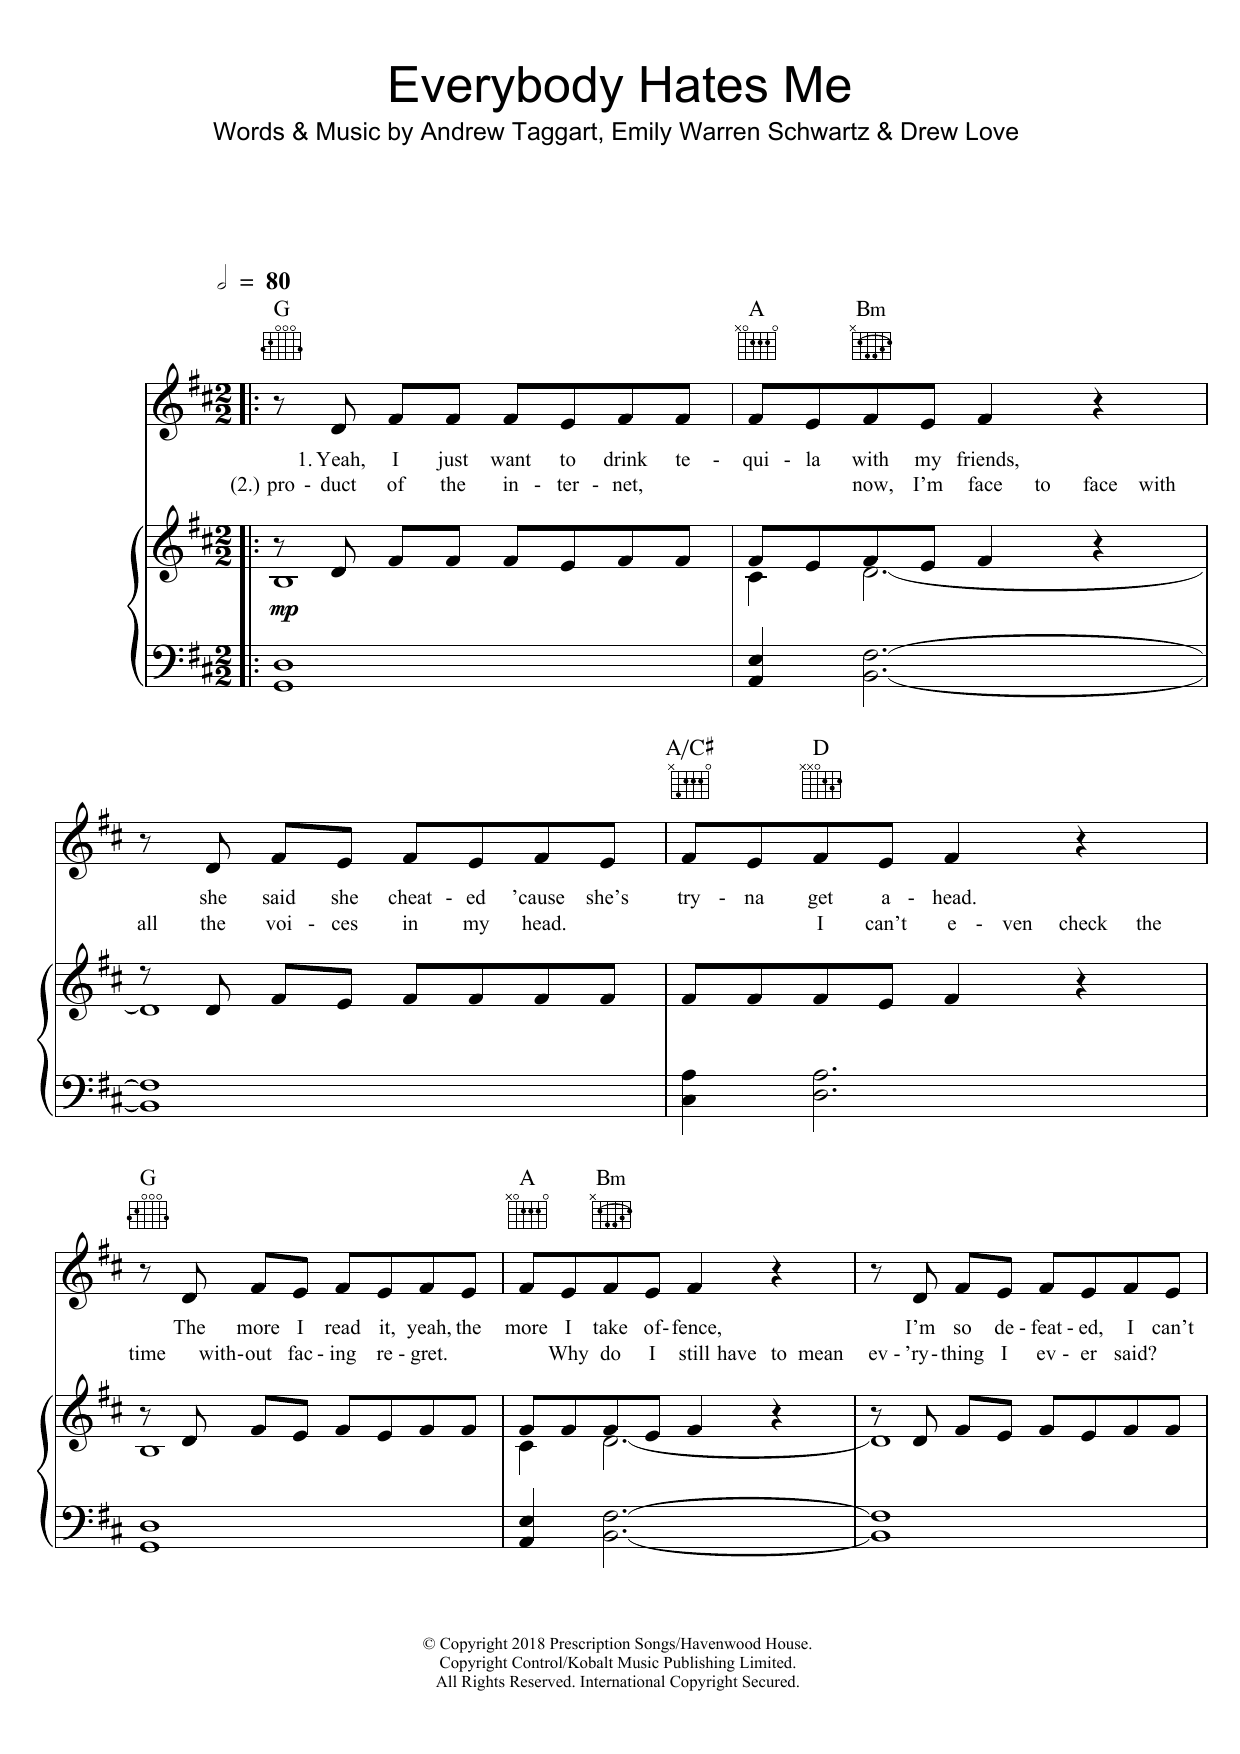 Download The Chainsmokers Everybody Hates Me Sheet Music